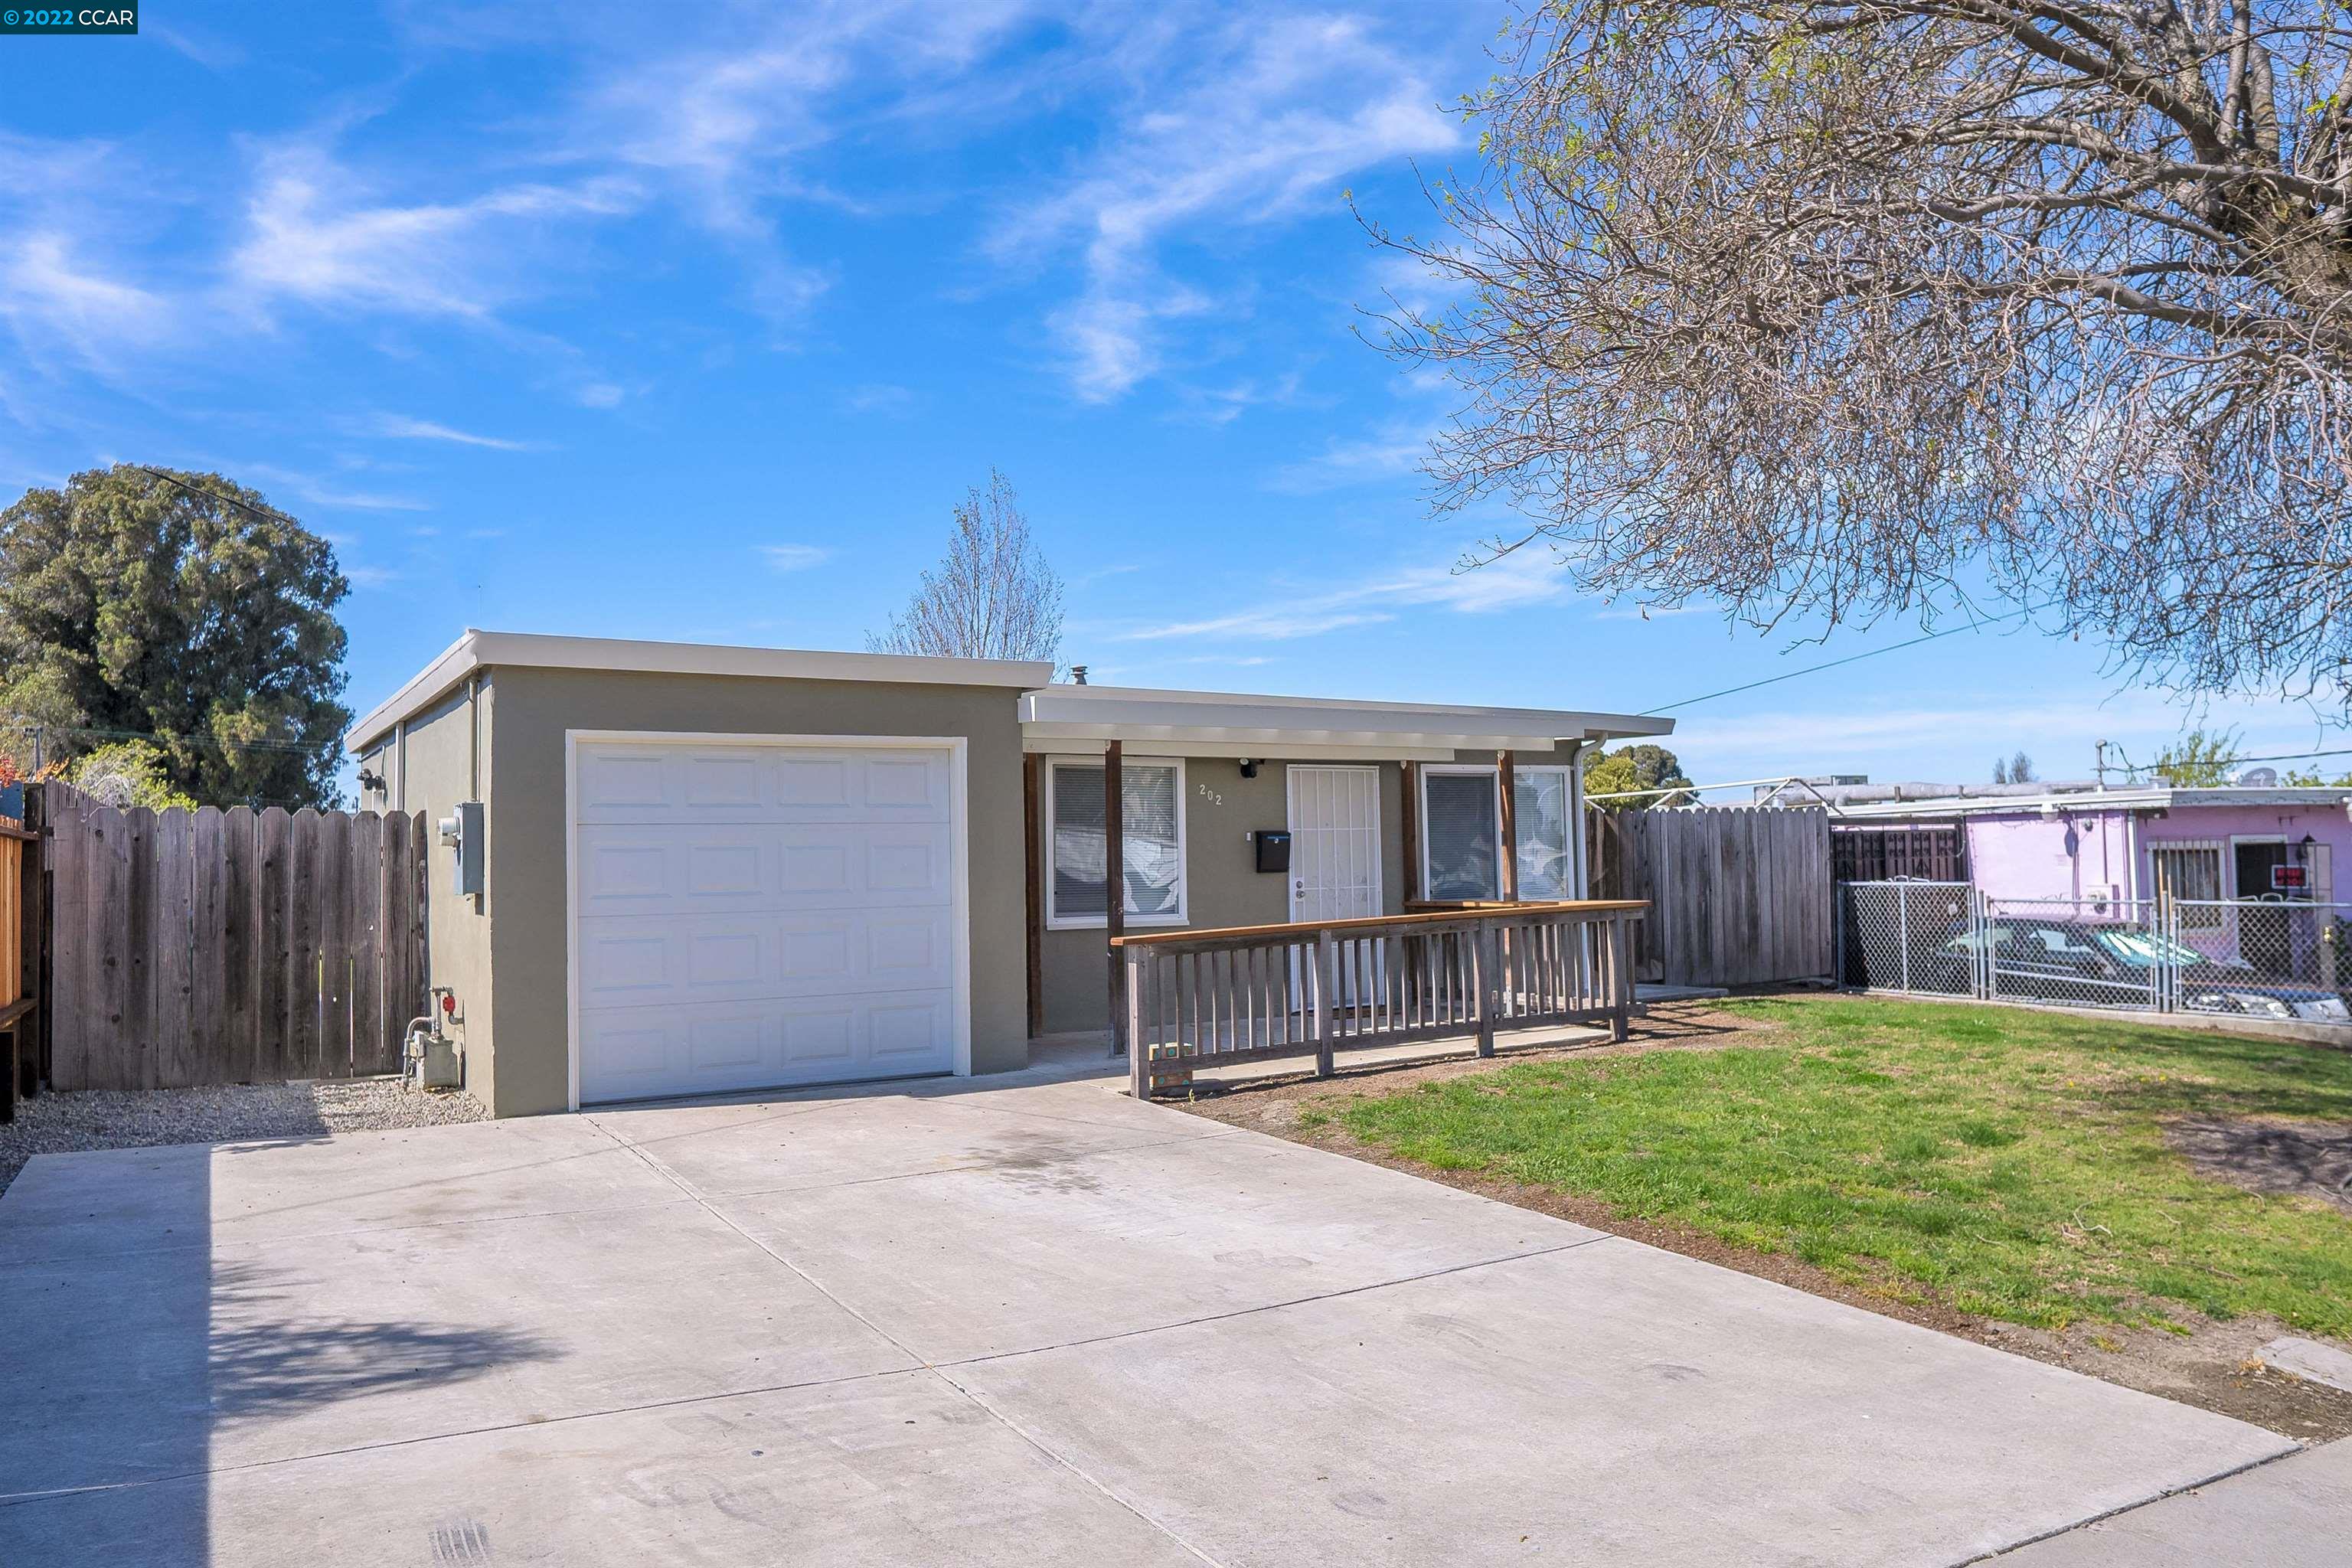 Photo of 202 Denise Dr in San Pablo, CA